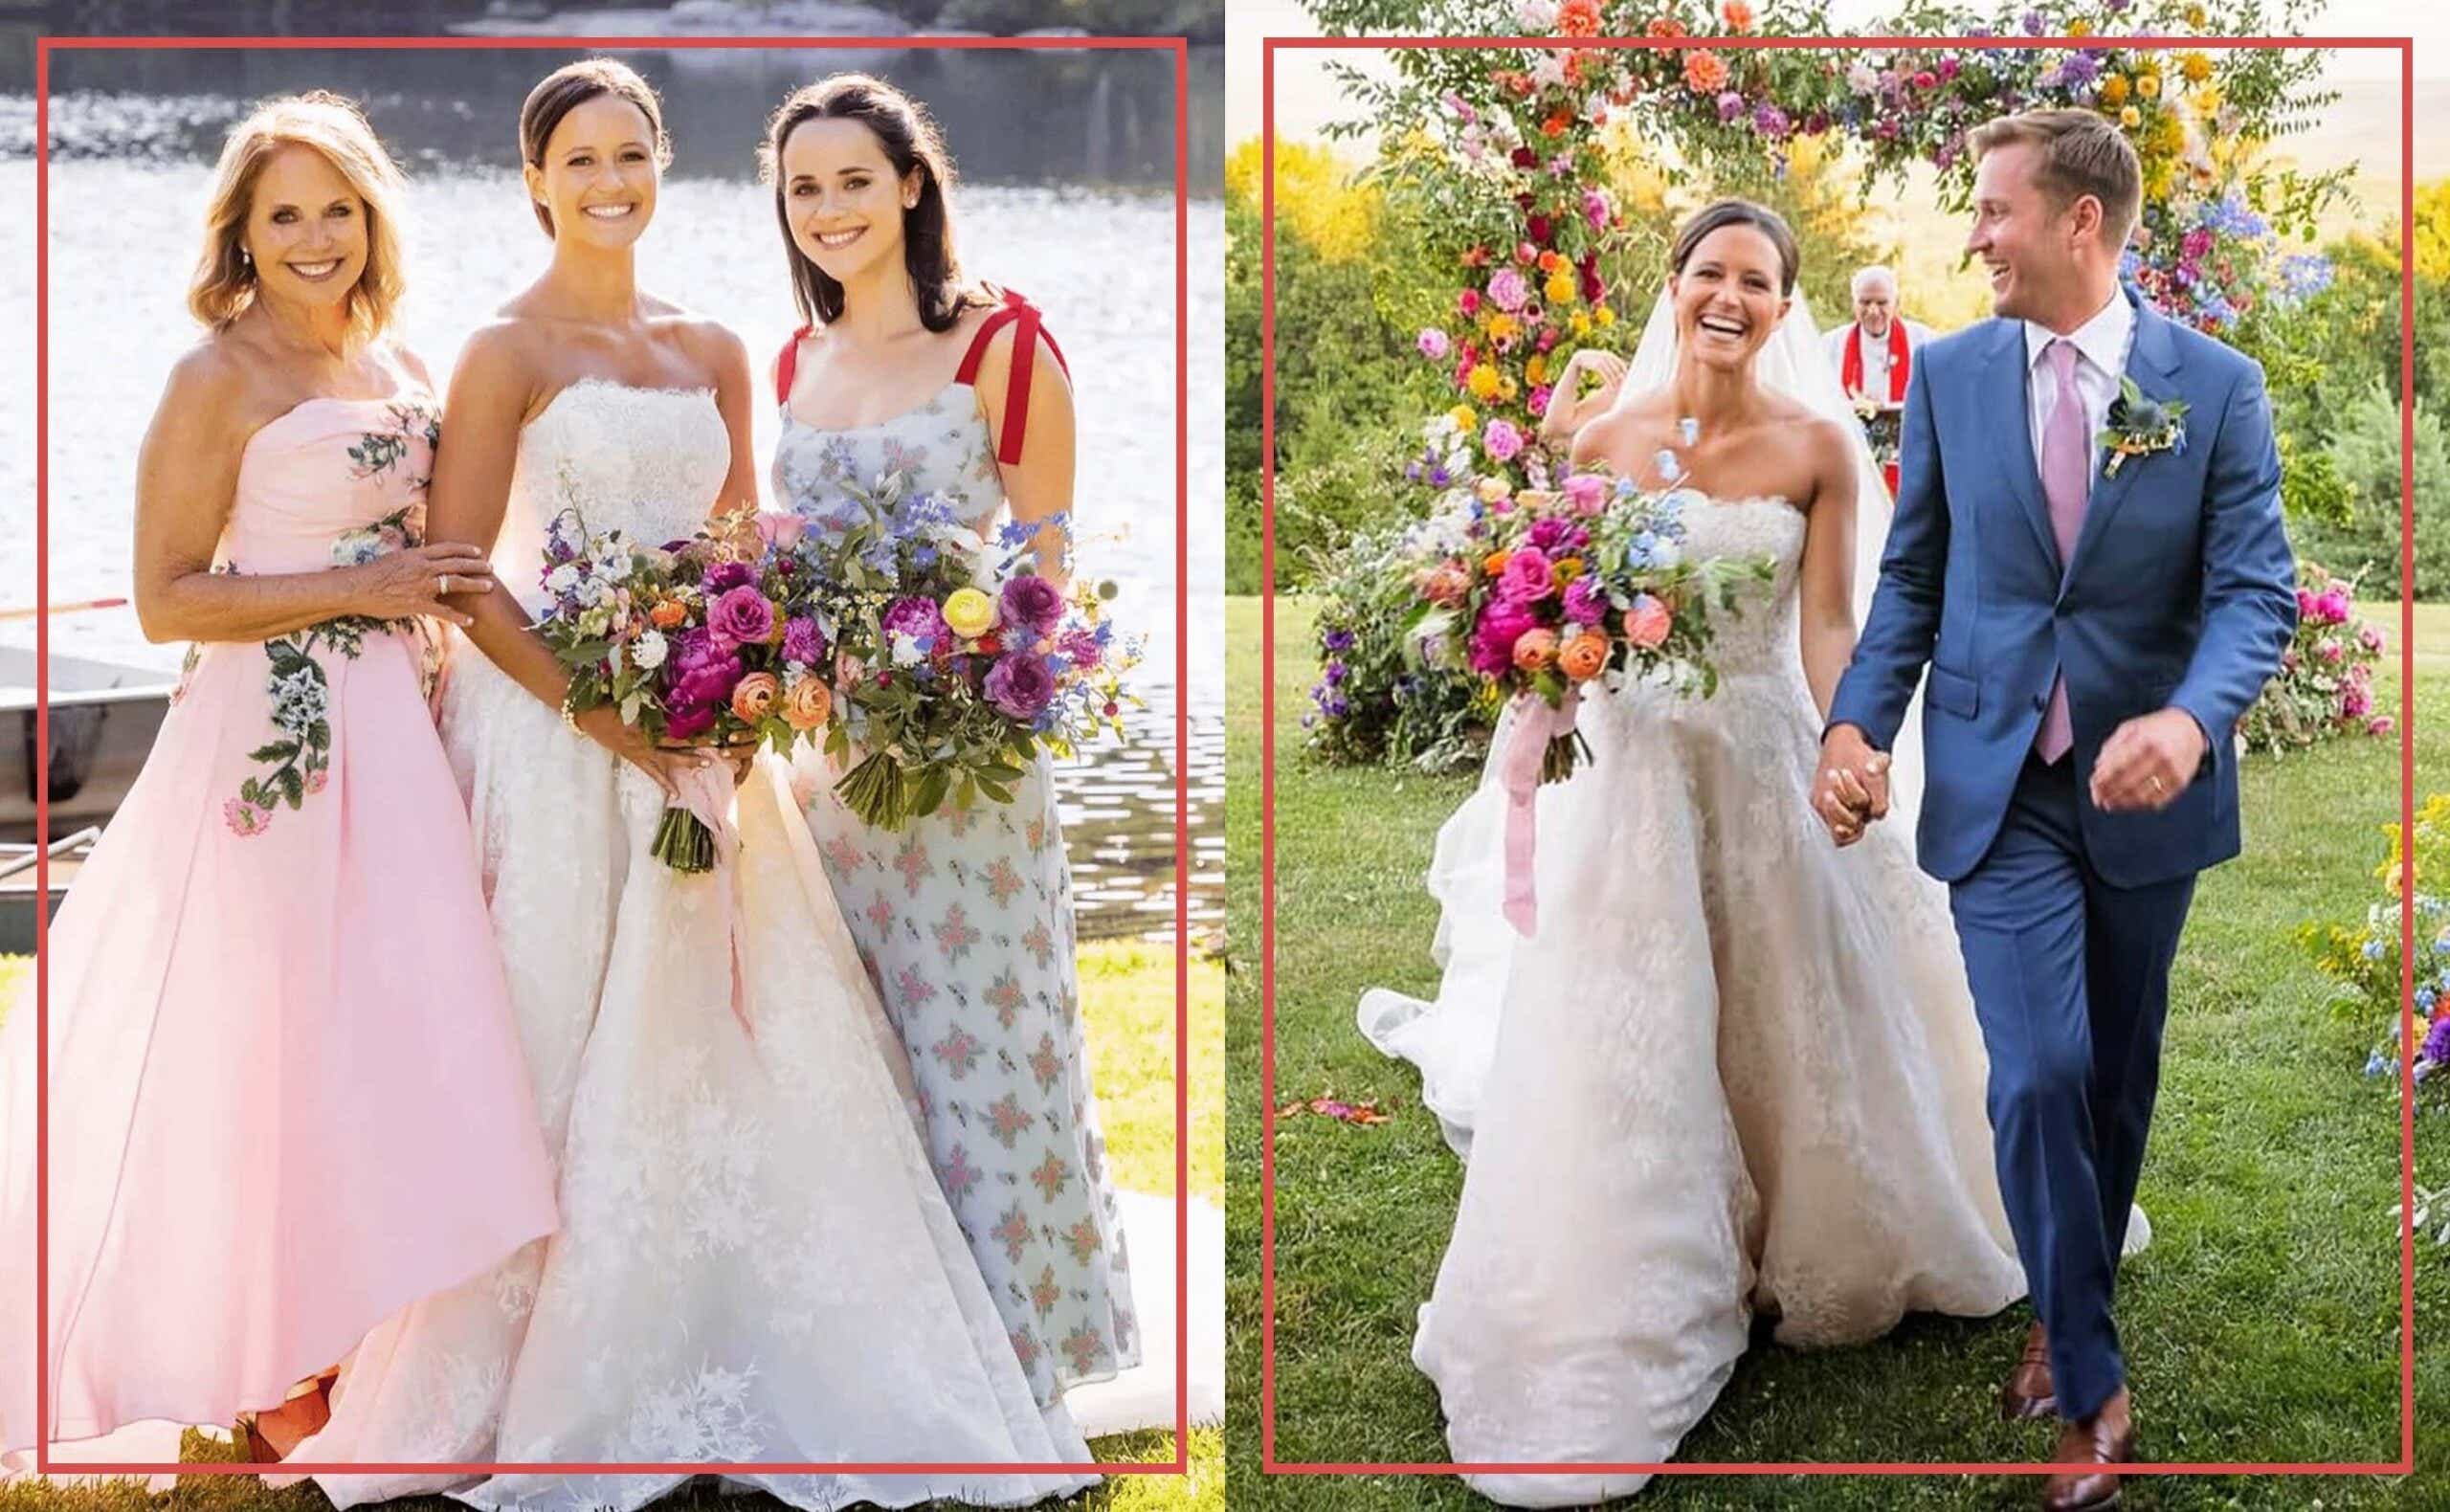 two images from Ellie Monahan's wedding side by side